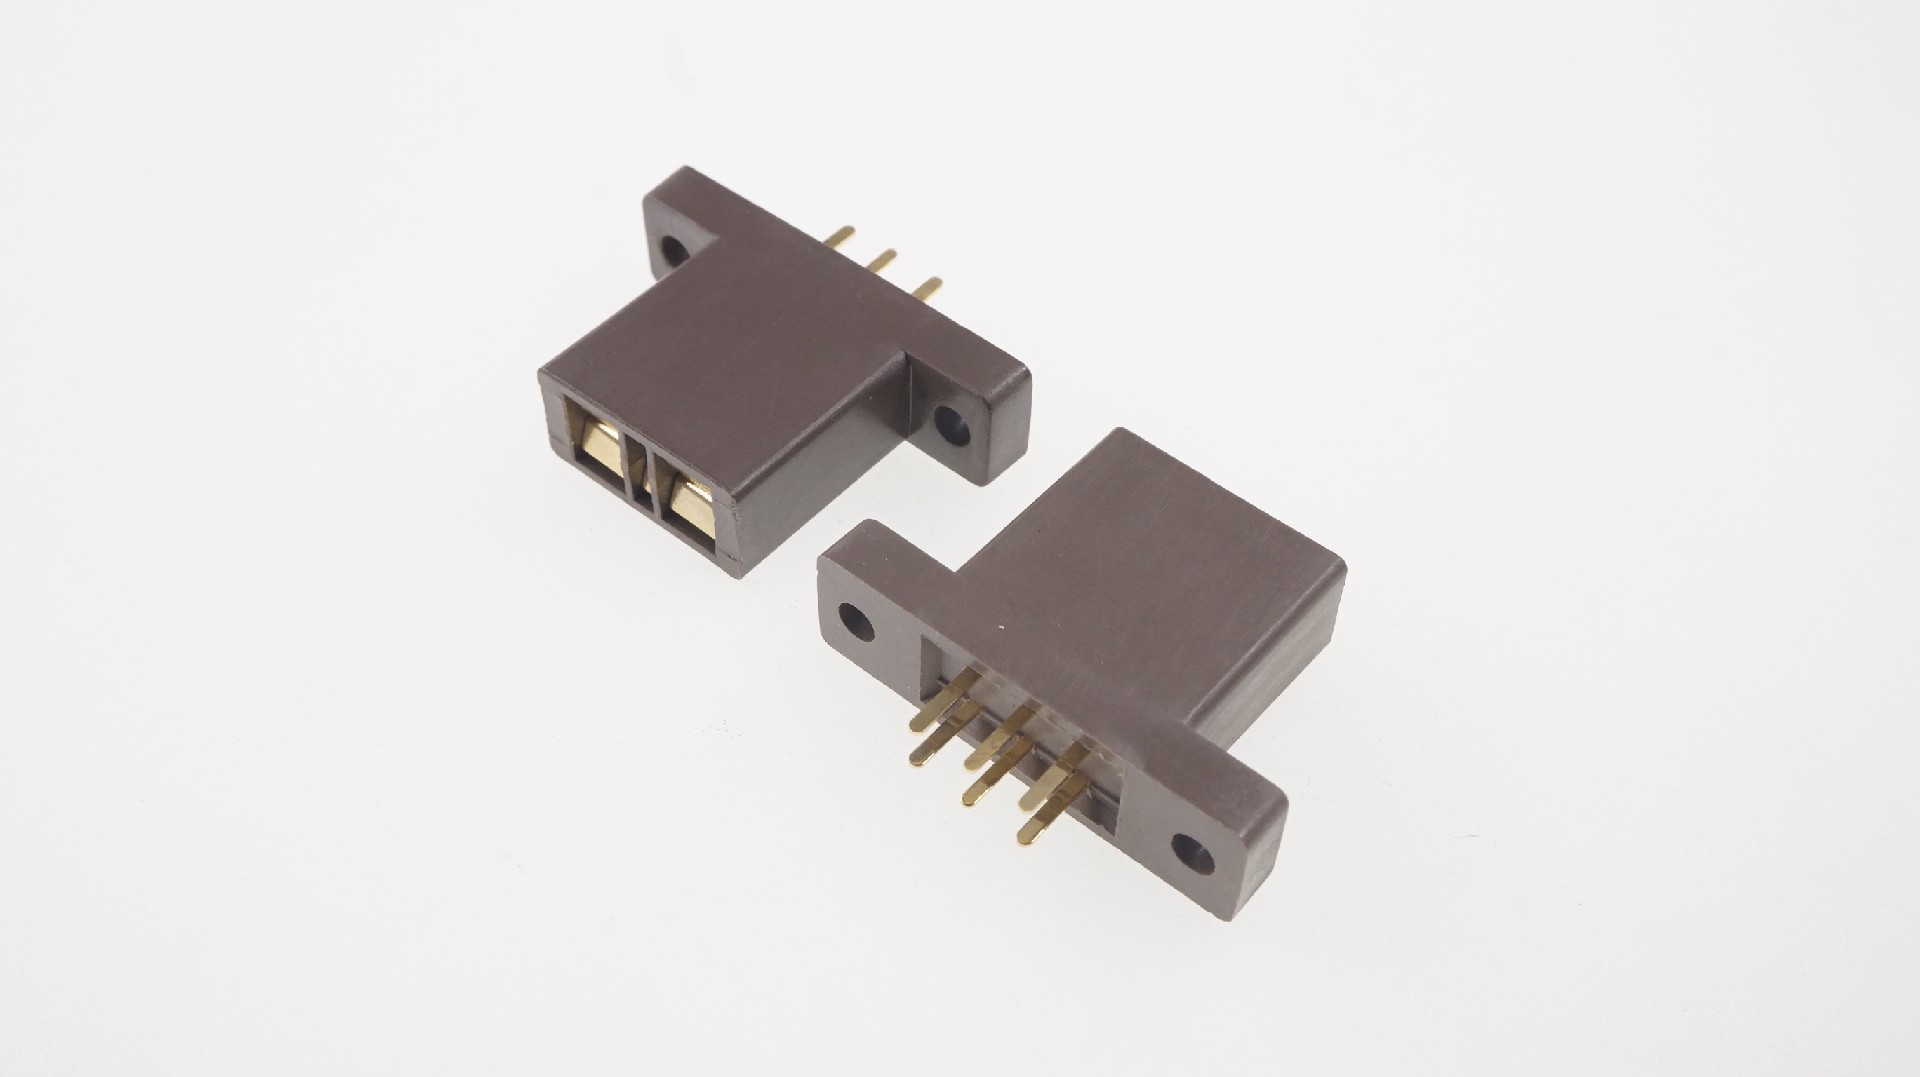 Burn In Socket 3 Poles for Diode Triode Package TO-3P TO-247 5.08mm Through Hole PCB Burn-in Gold Plated Test Receptacle